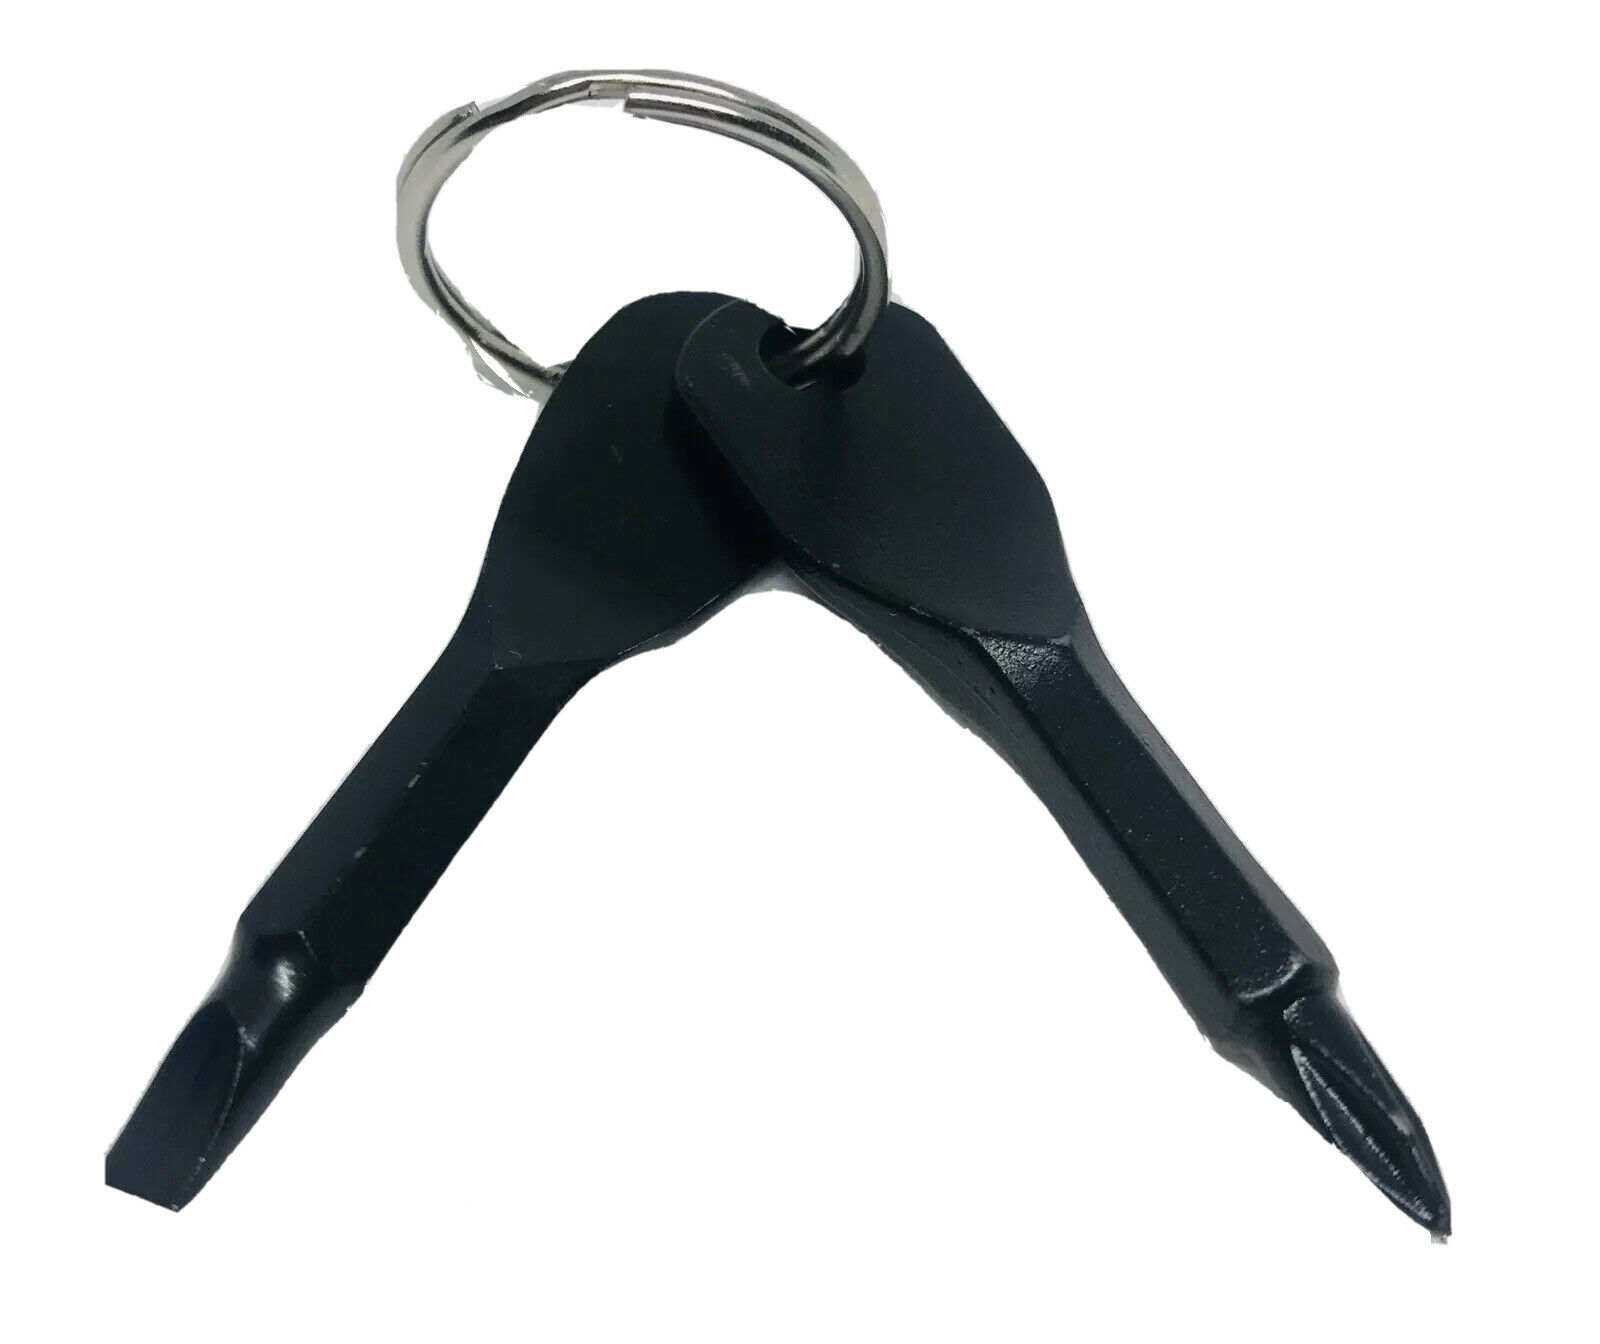 Black Screwdriver Stainless Steel Key Chain Ring Pocket Outdoor Multi Tool